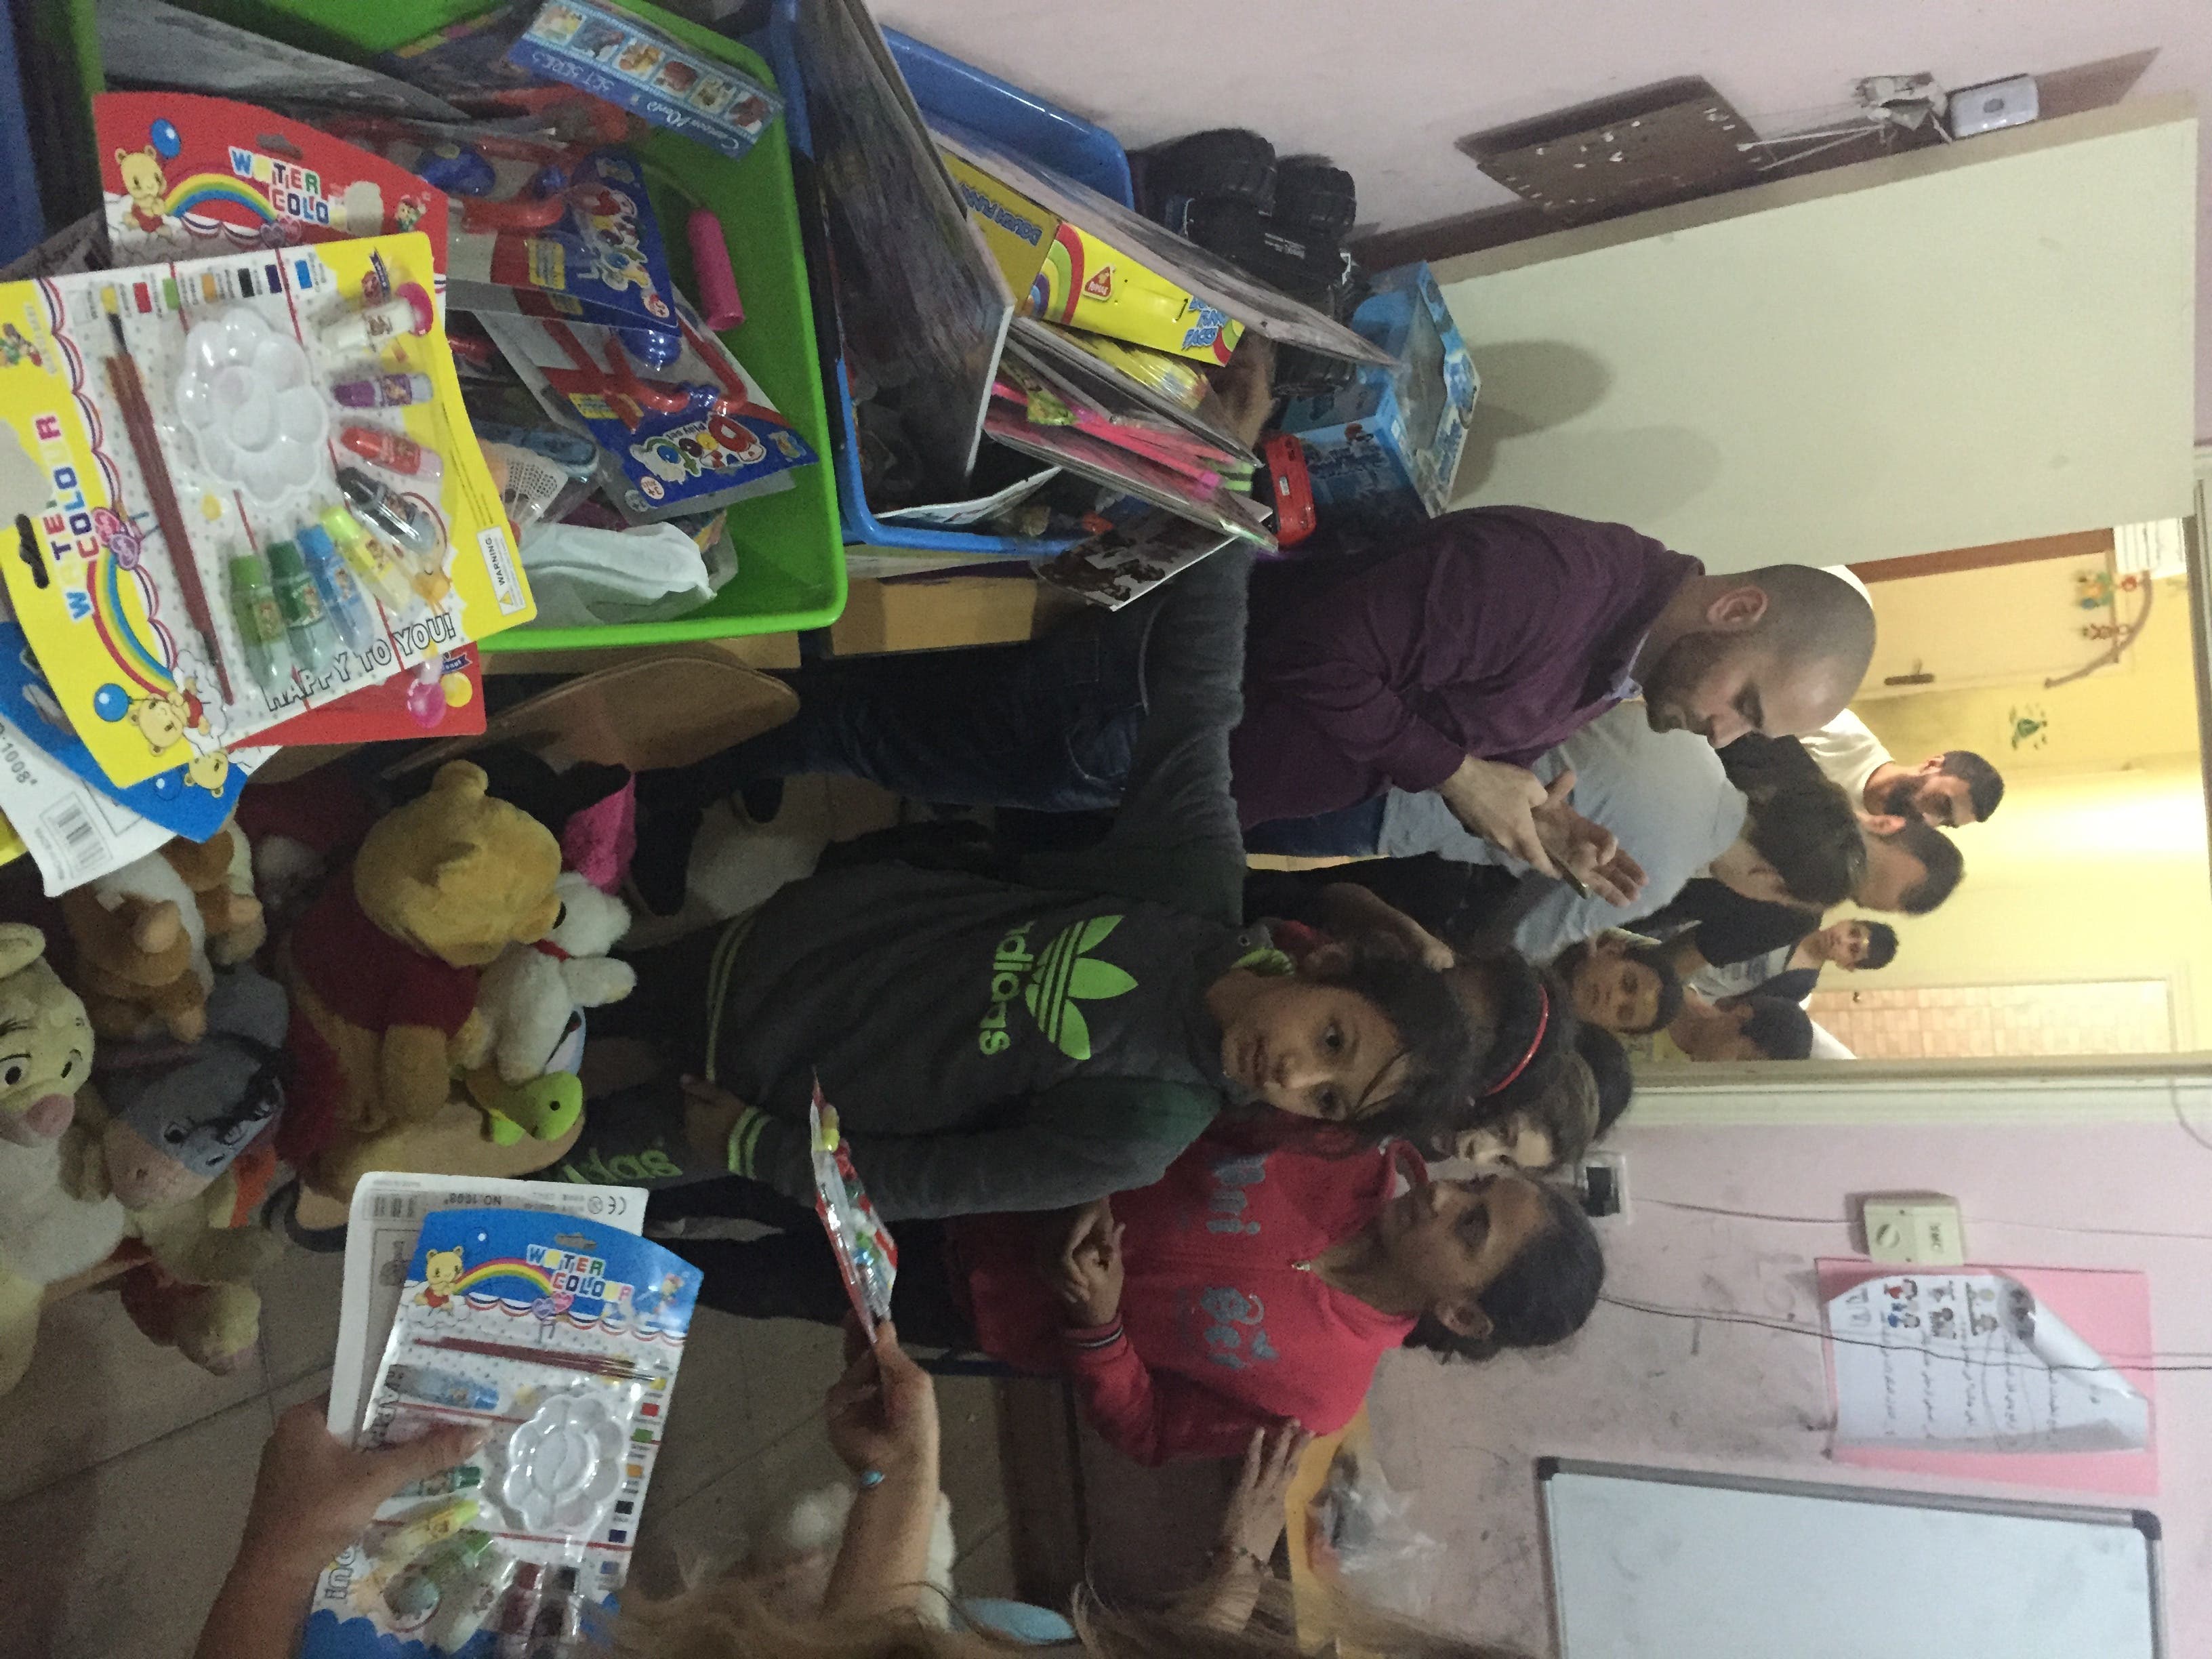 Toys With Wings distributed about 1,000 toys to Syrian children at Shatila refugee camp, Lebanon.